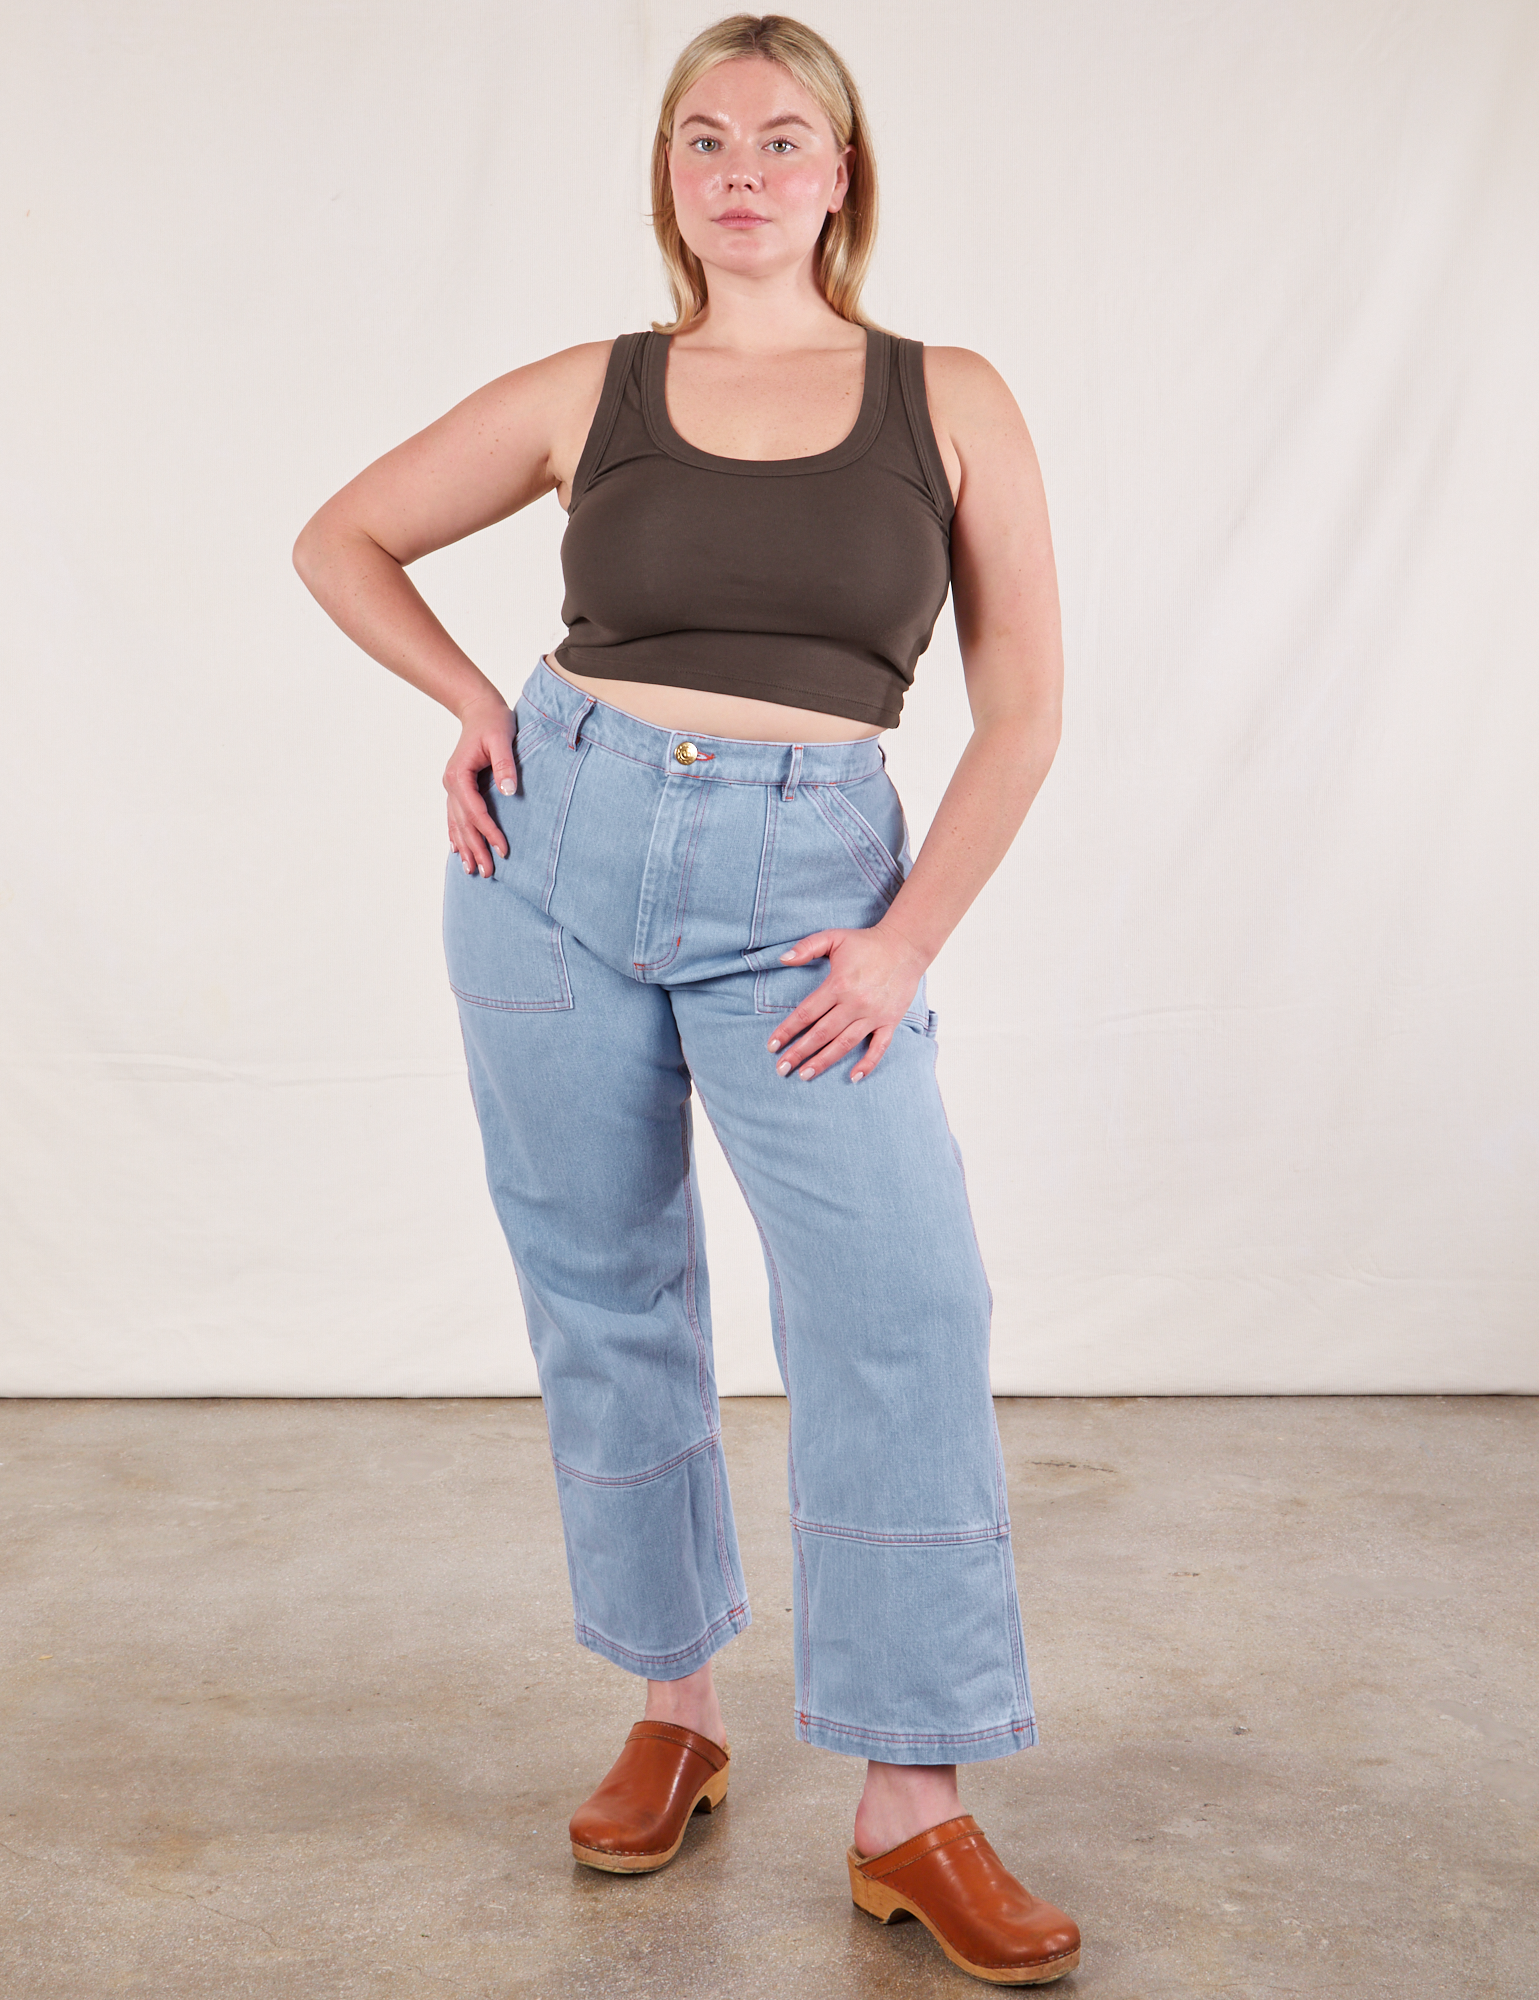 Lish is wearing Cropped Tank Top in Espresso Brown and light wash Carpenter Jeans